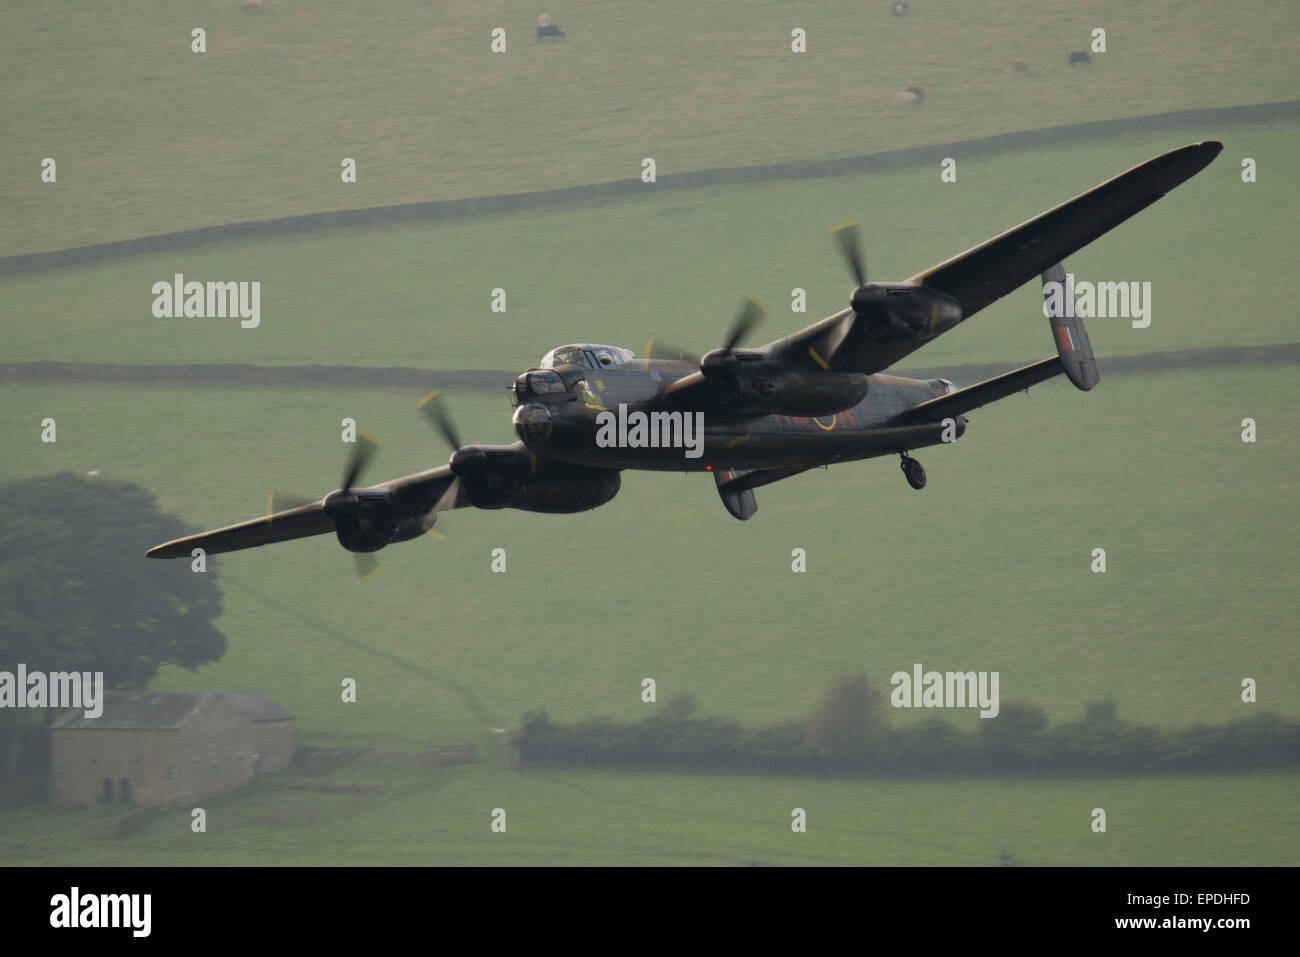 Pictured here is The Avro Lancaster Bomber Banking During a Fly over the Ladybower Reservoir in the Derwent Valley. Stock Photo